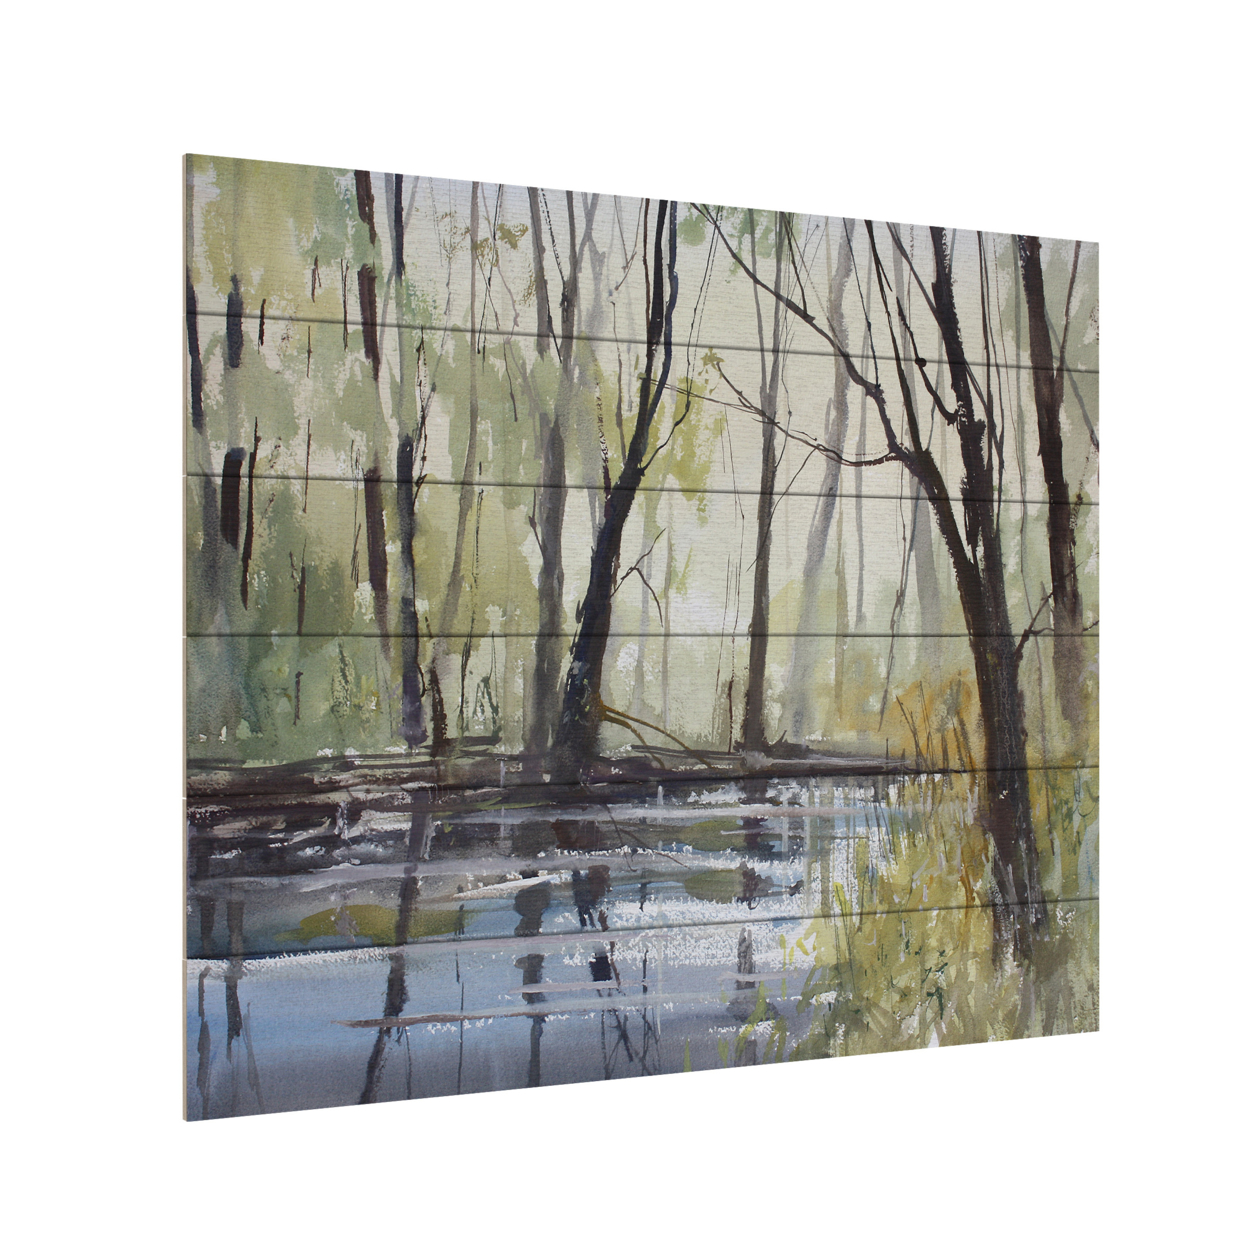 Wooden Slat Art 18 X 22 Inches Titled Pine River Reflections Ready To Hang Home Decor Picture